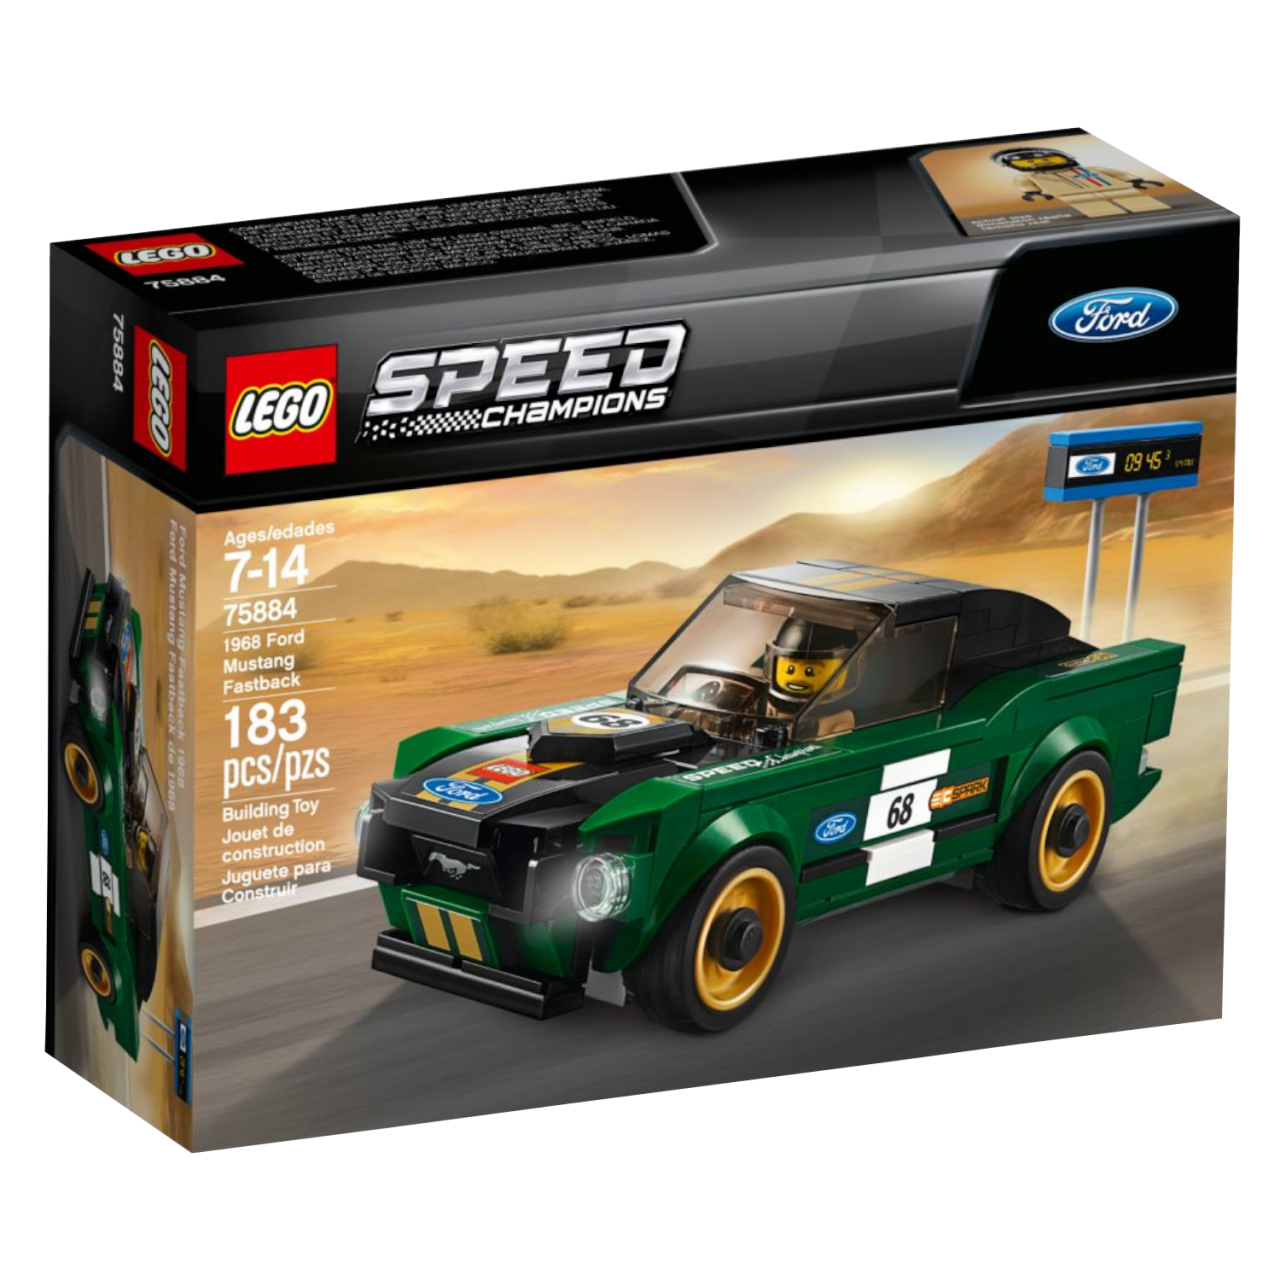 LEGO SPEED CHAMPIONS 75884 1968 Ford Mustang Fastback